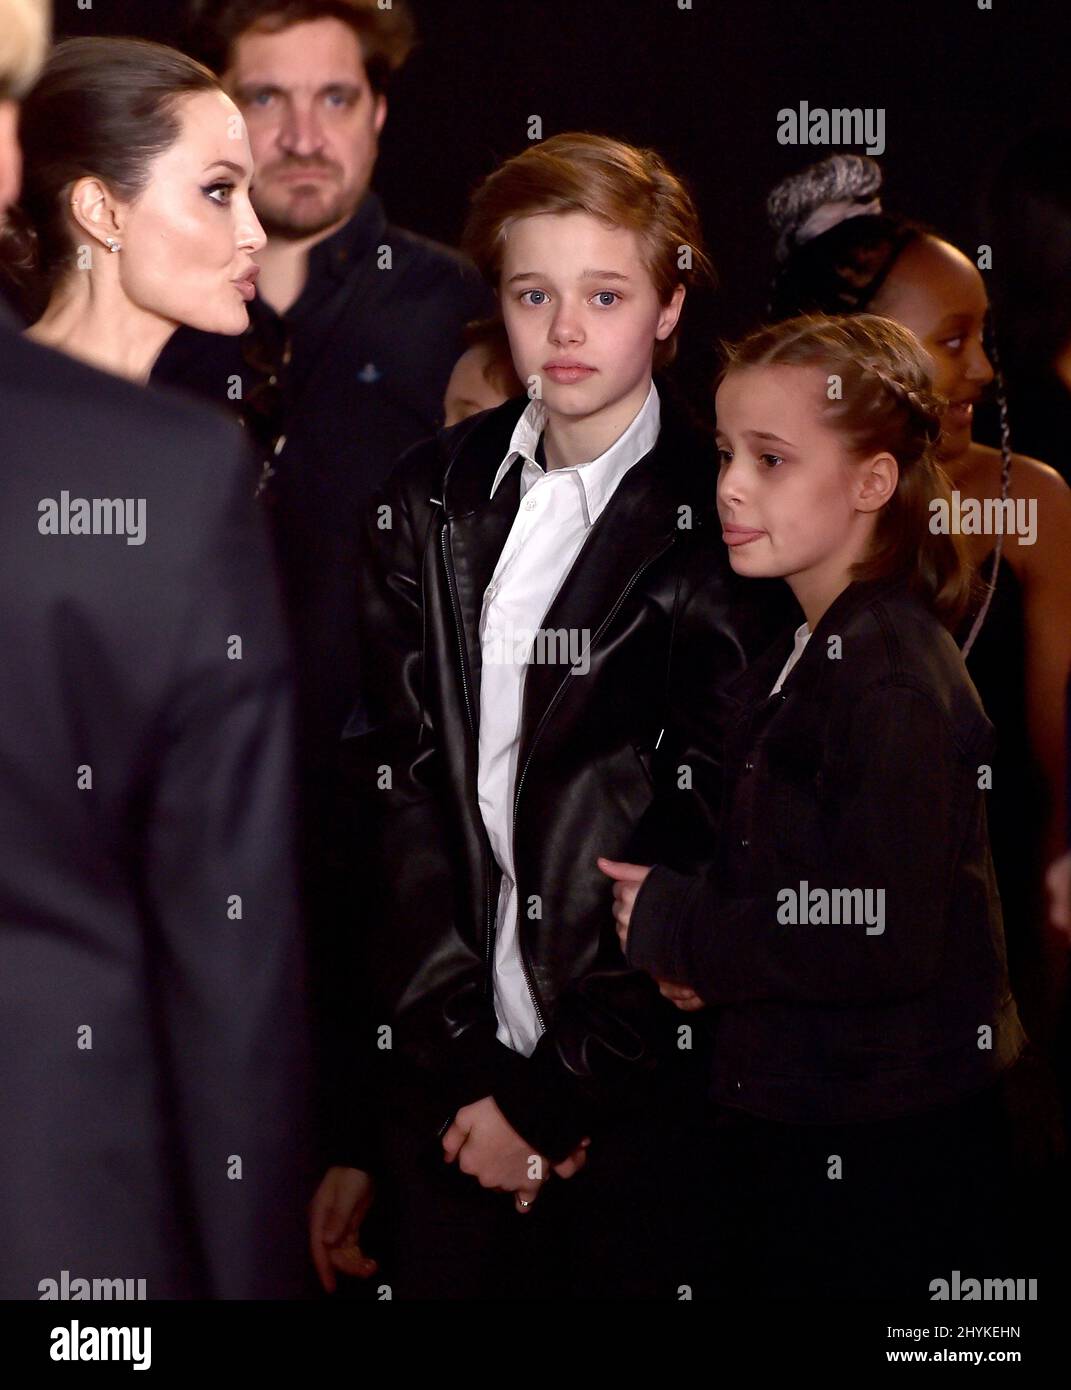 Shiloh Jolie-Pitt at the world premiere of 'Maleficent: Mistress of Evil' held at the El Capitan Theatre on September 30, 2019 in Hollywood, CA. Stock Photo